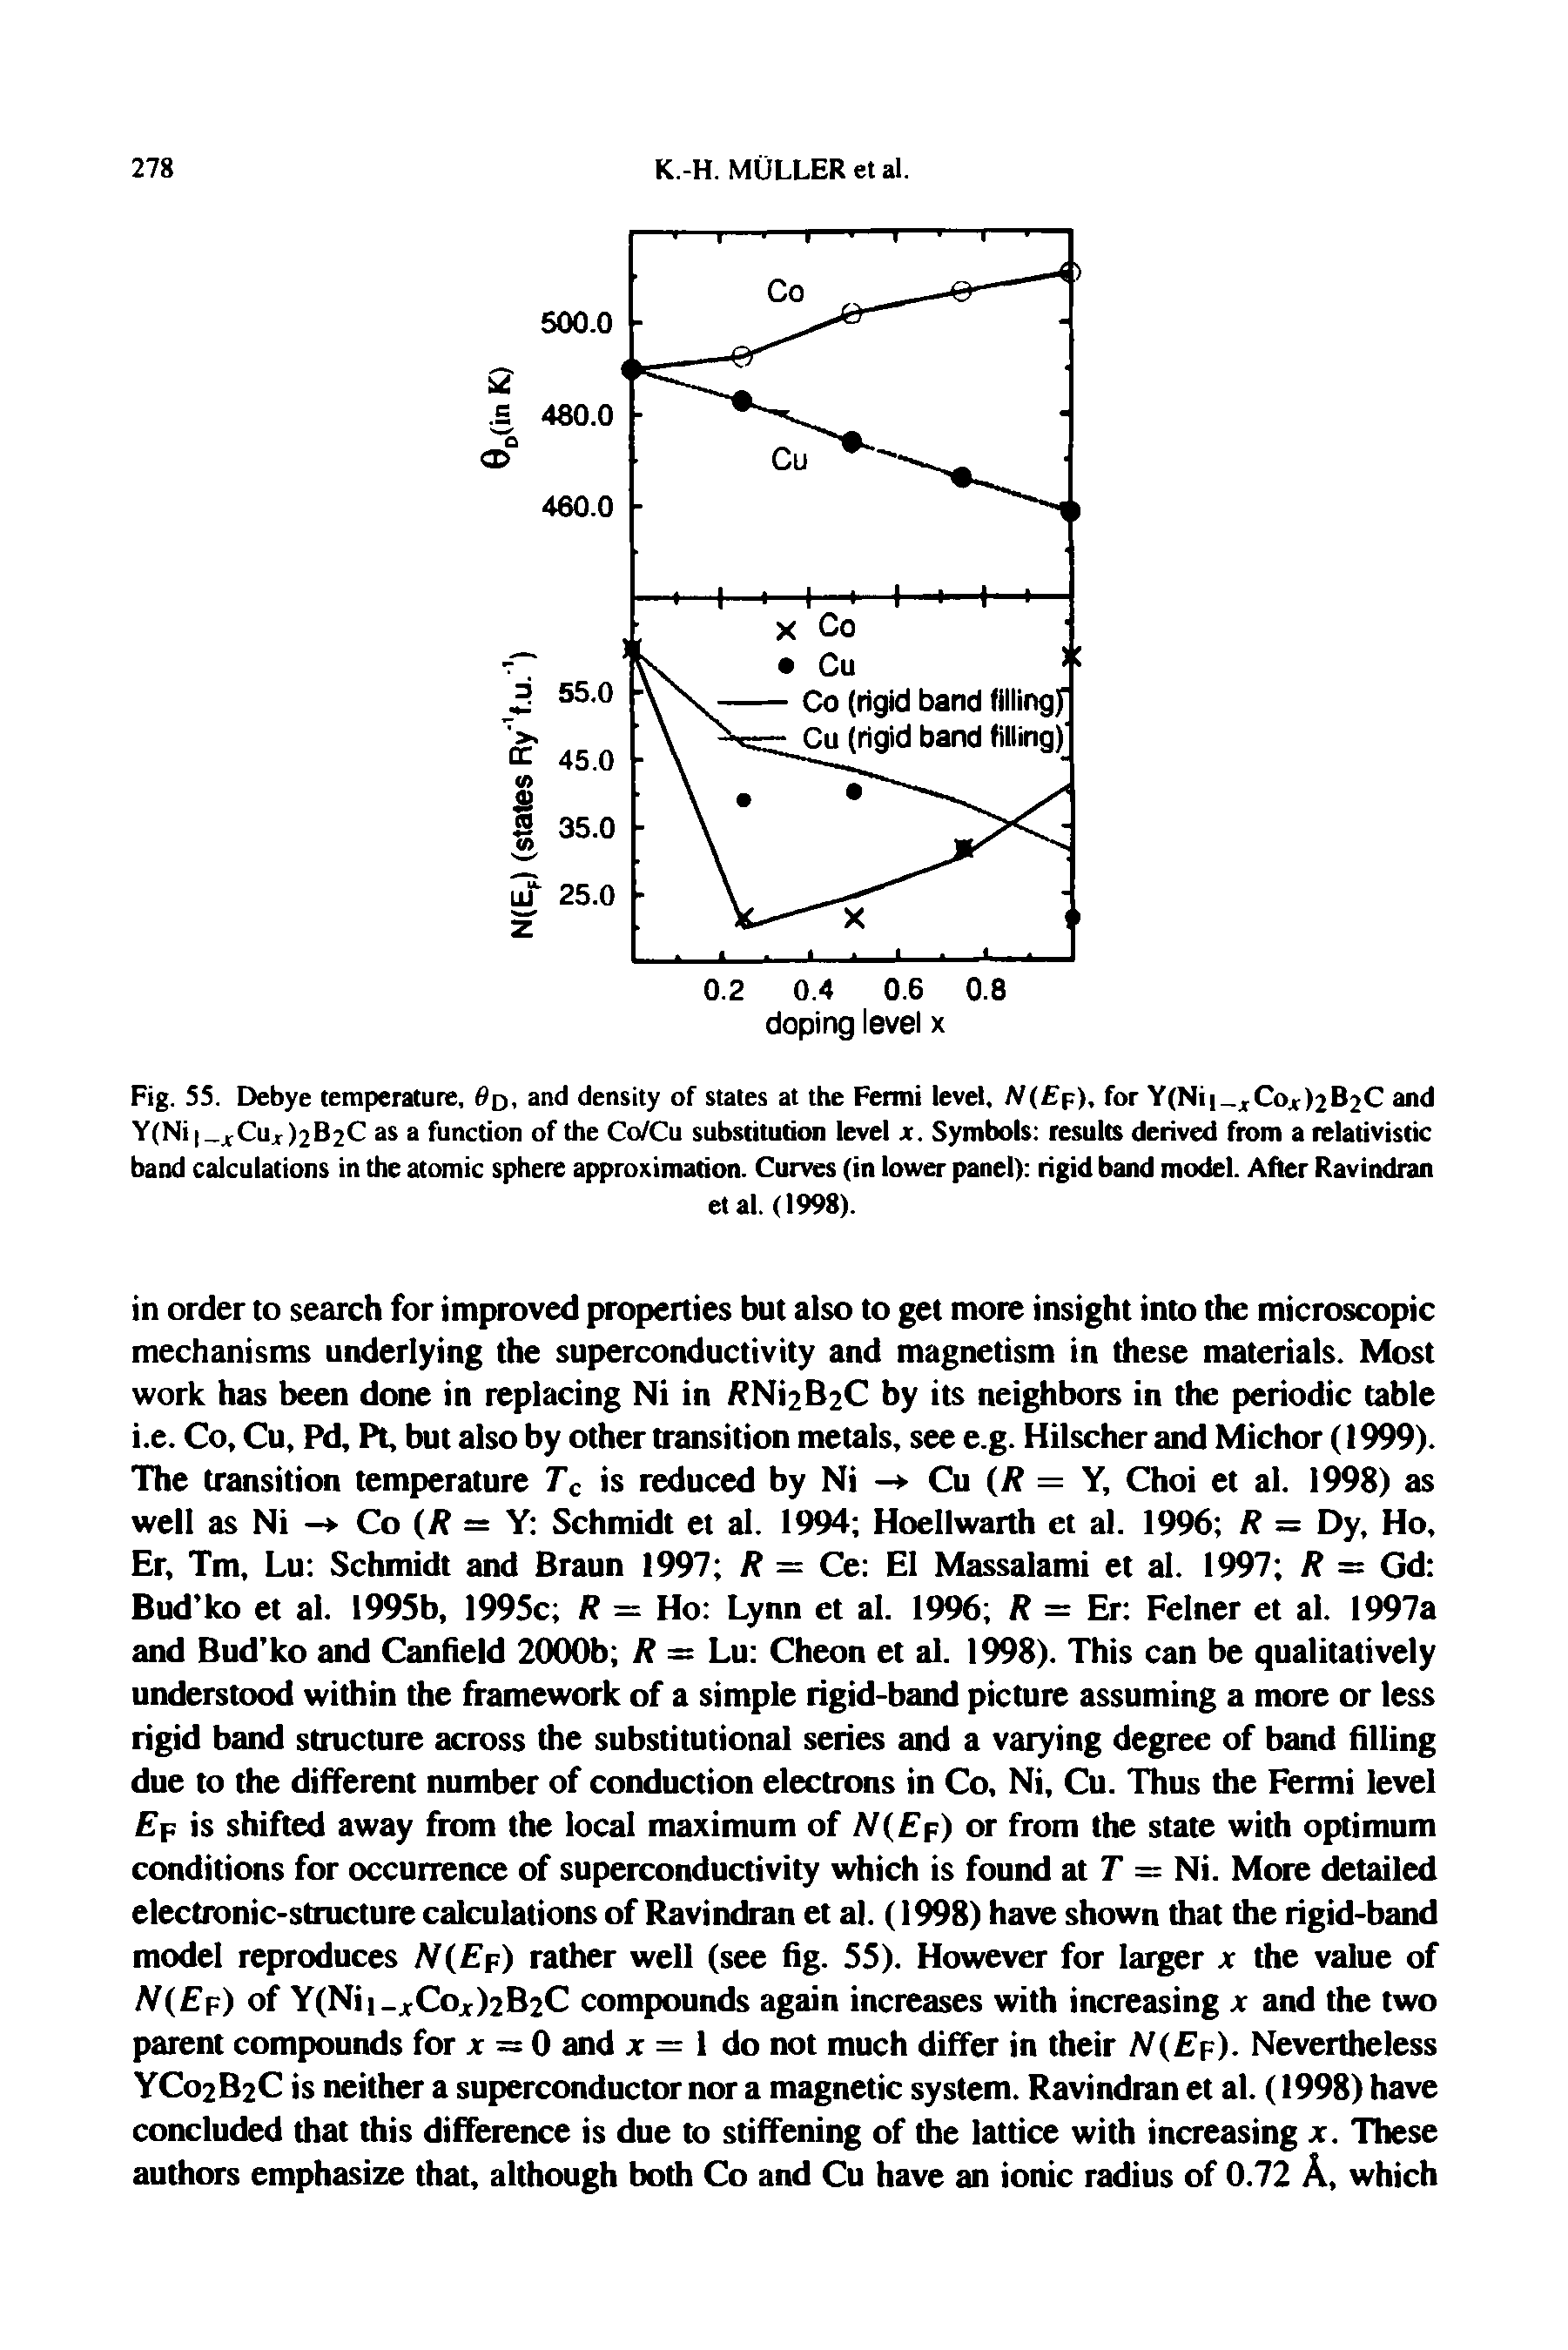 Fig. 55. Debye temperature, d, and density of states at the Fermi level, N(Ep), for Y(Ni xCox)2B2C and Y(Ni xCux )2B2C as a function of the Co/Cu substitution level x. Symbols results derived from a relativistic band calculations in the atomic sphere approximation. Curves (in lower panel) rigid band model. After Ravindran...